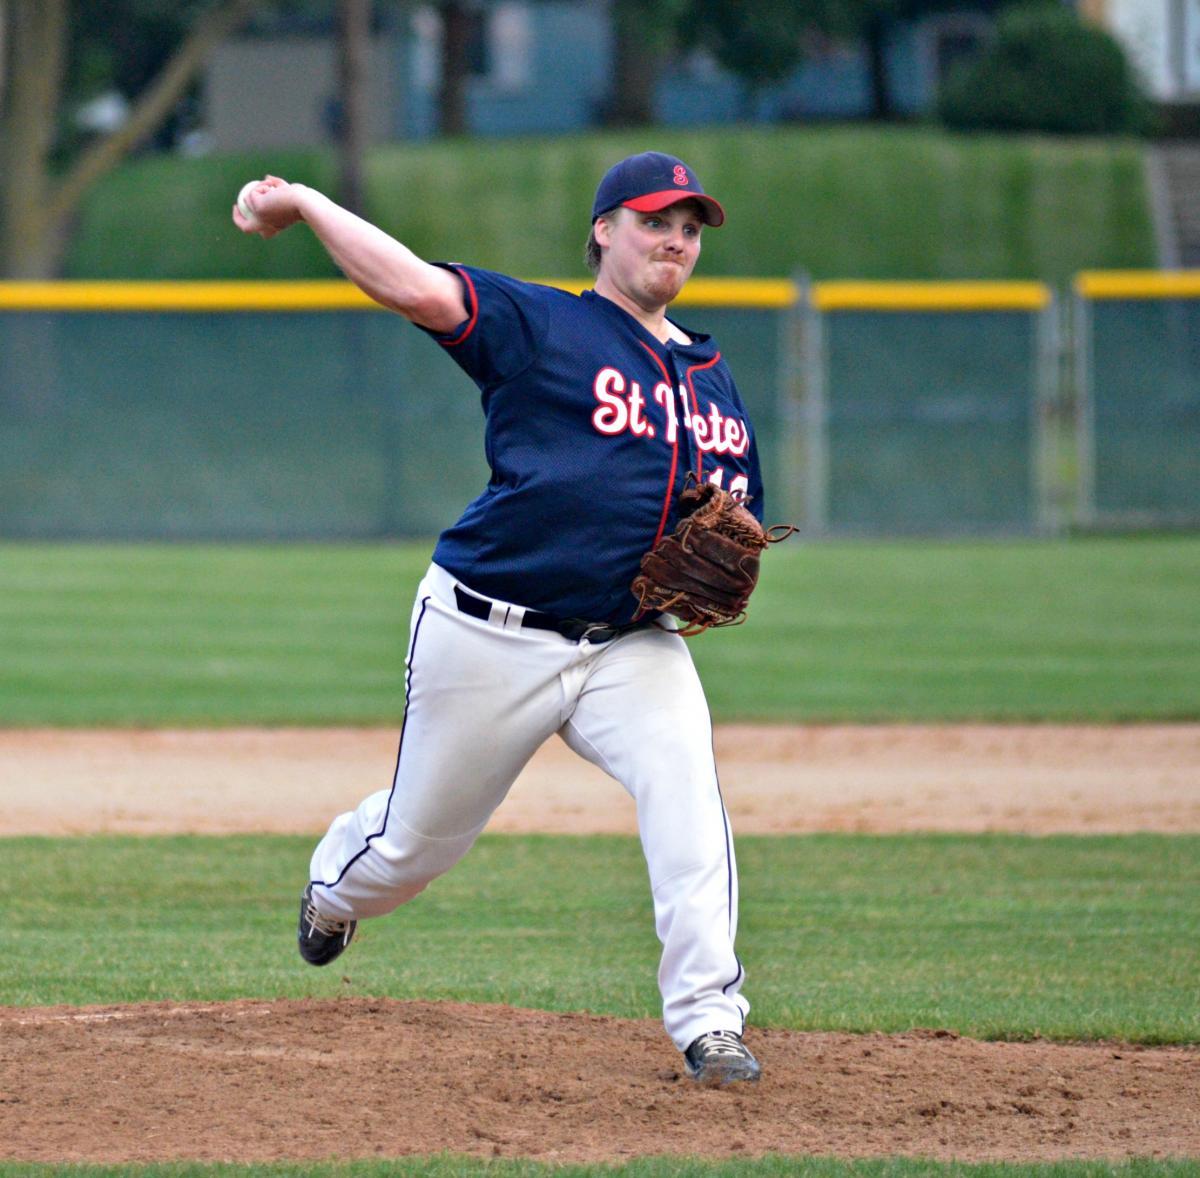 Wenner pitches gem as town team shuts out Belle Plaine